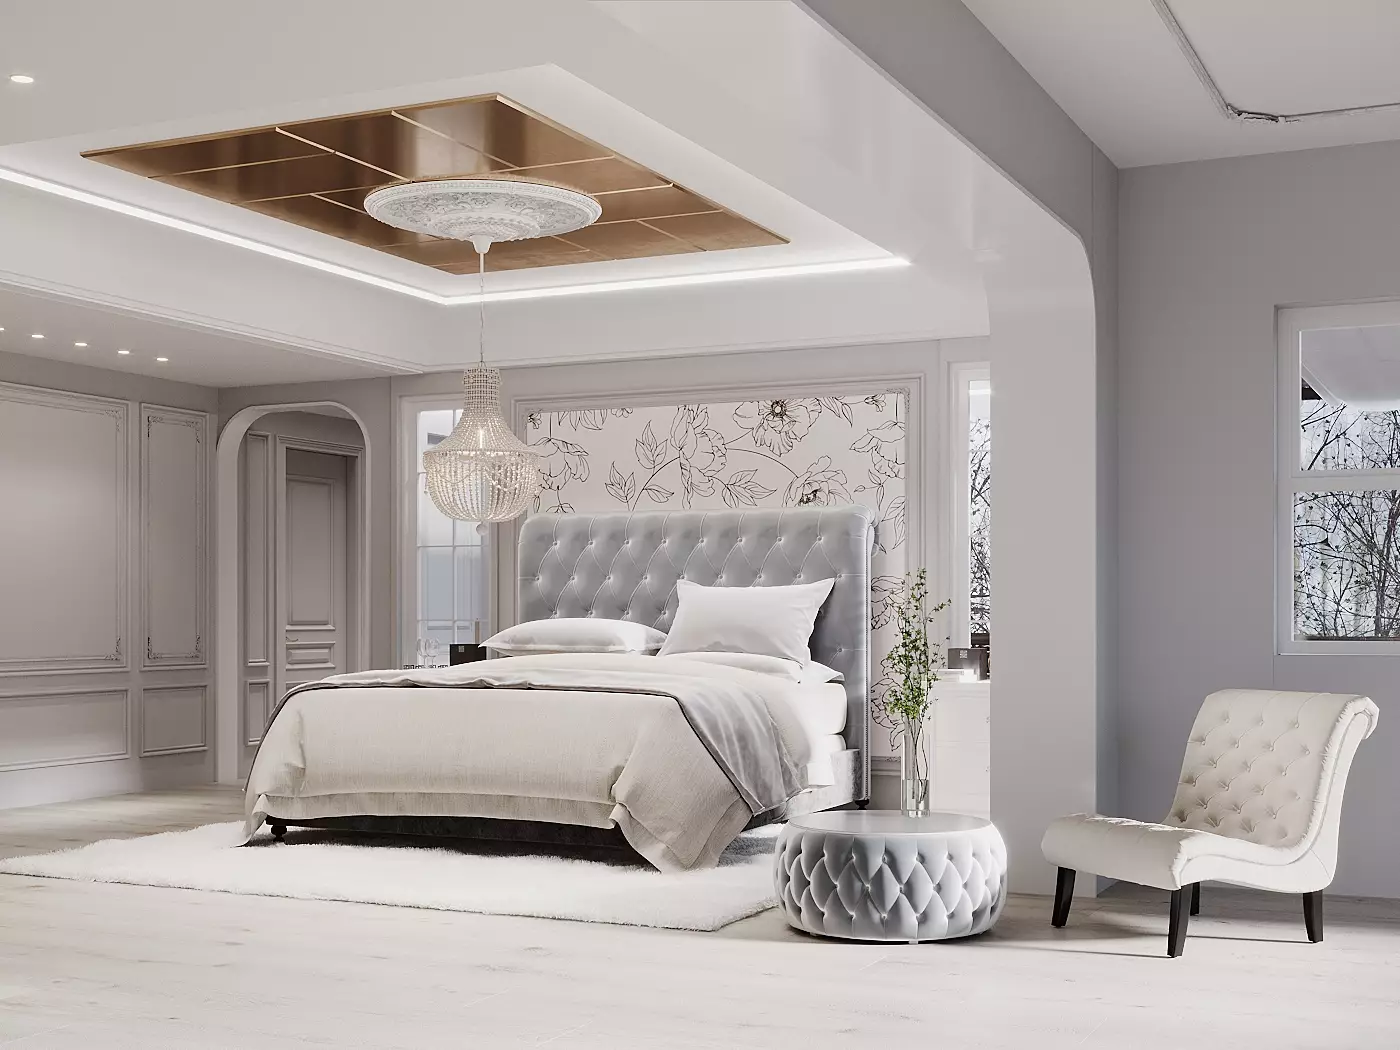 Tufted patterns and fine wall molding art in a spacious and well-lit gray bedroom